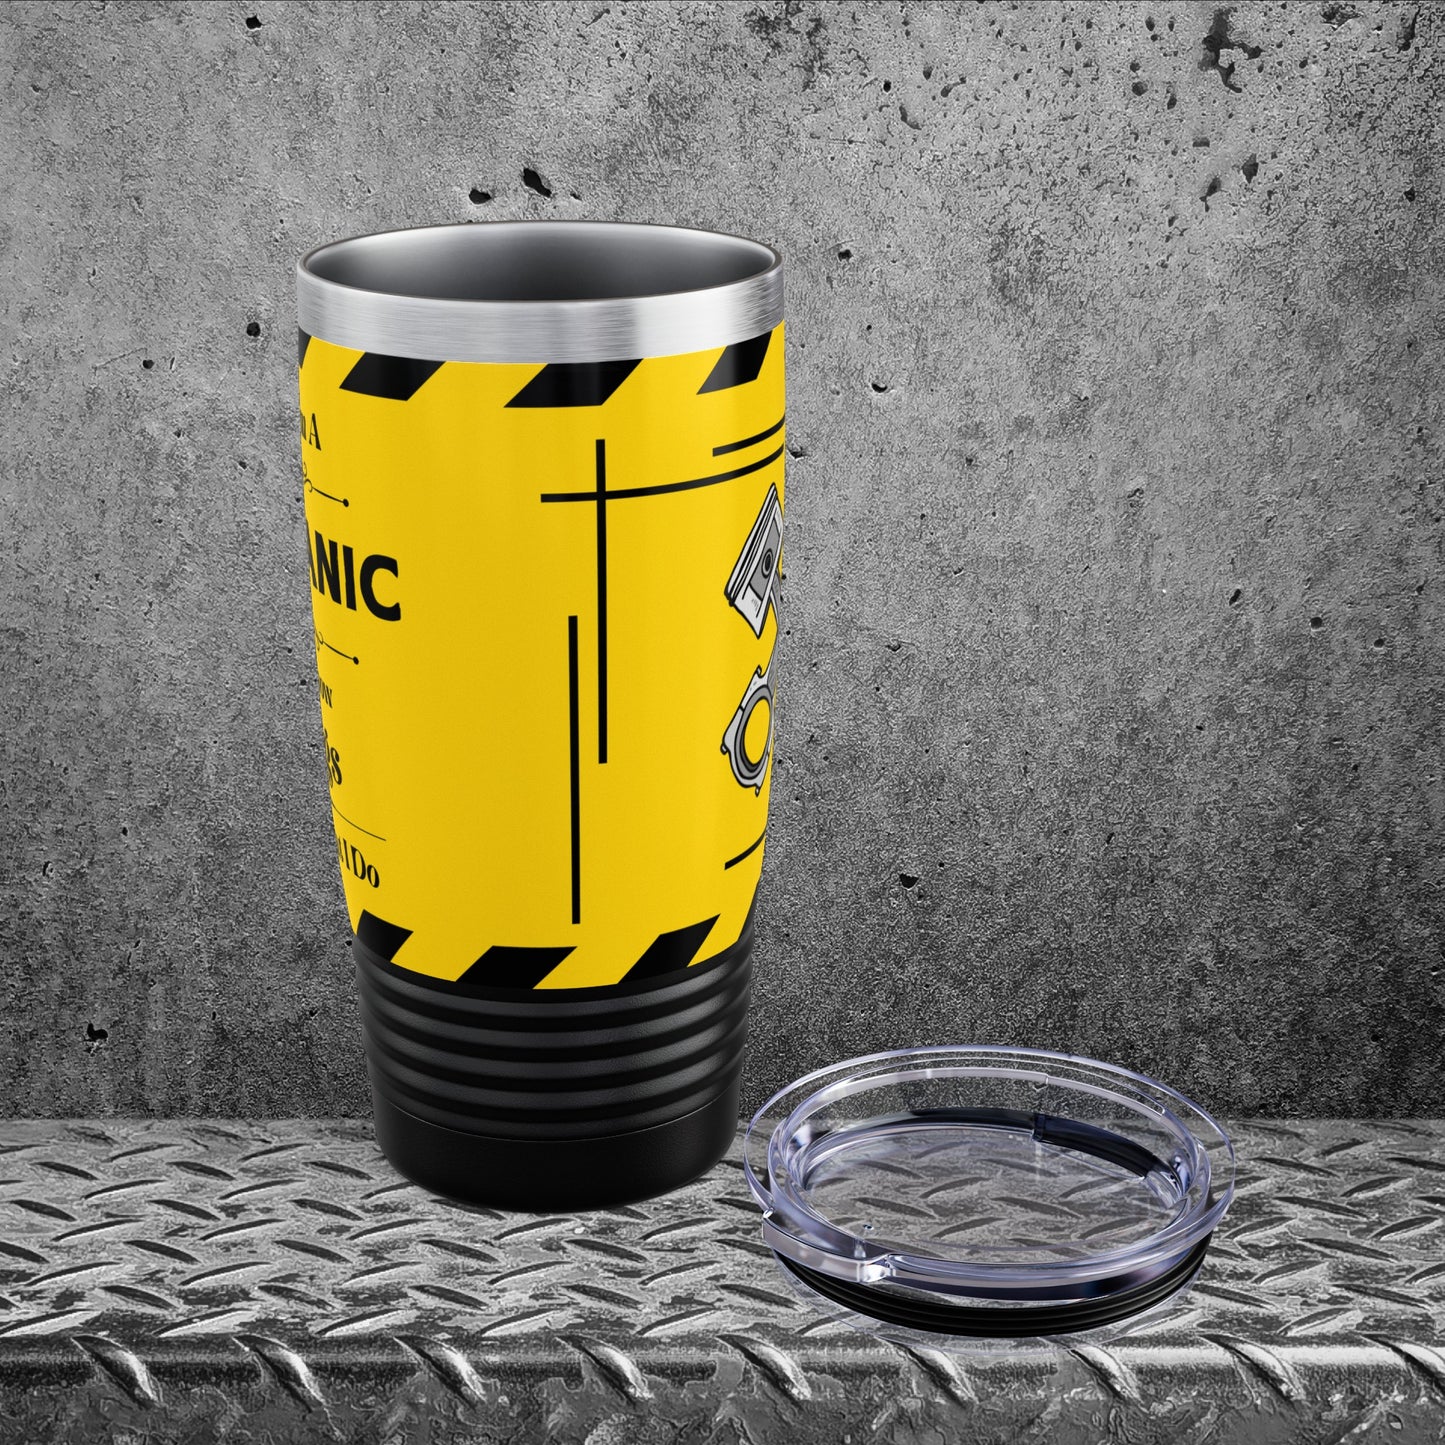 Relax, I'm A MECHANIC, And I Know Things - Ringneck Tumbler, 20oz